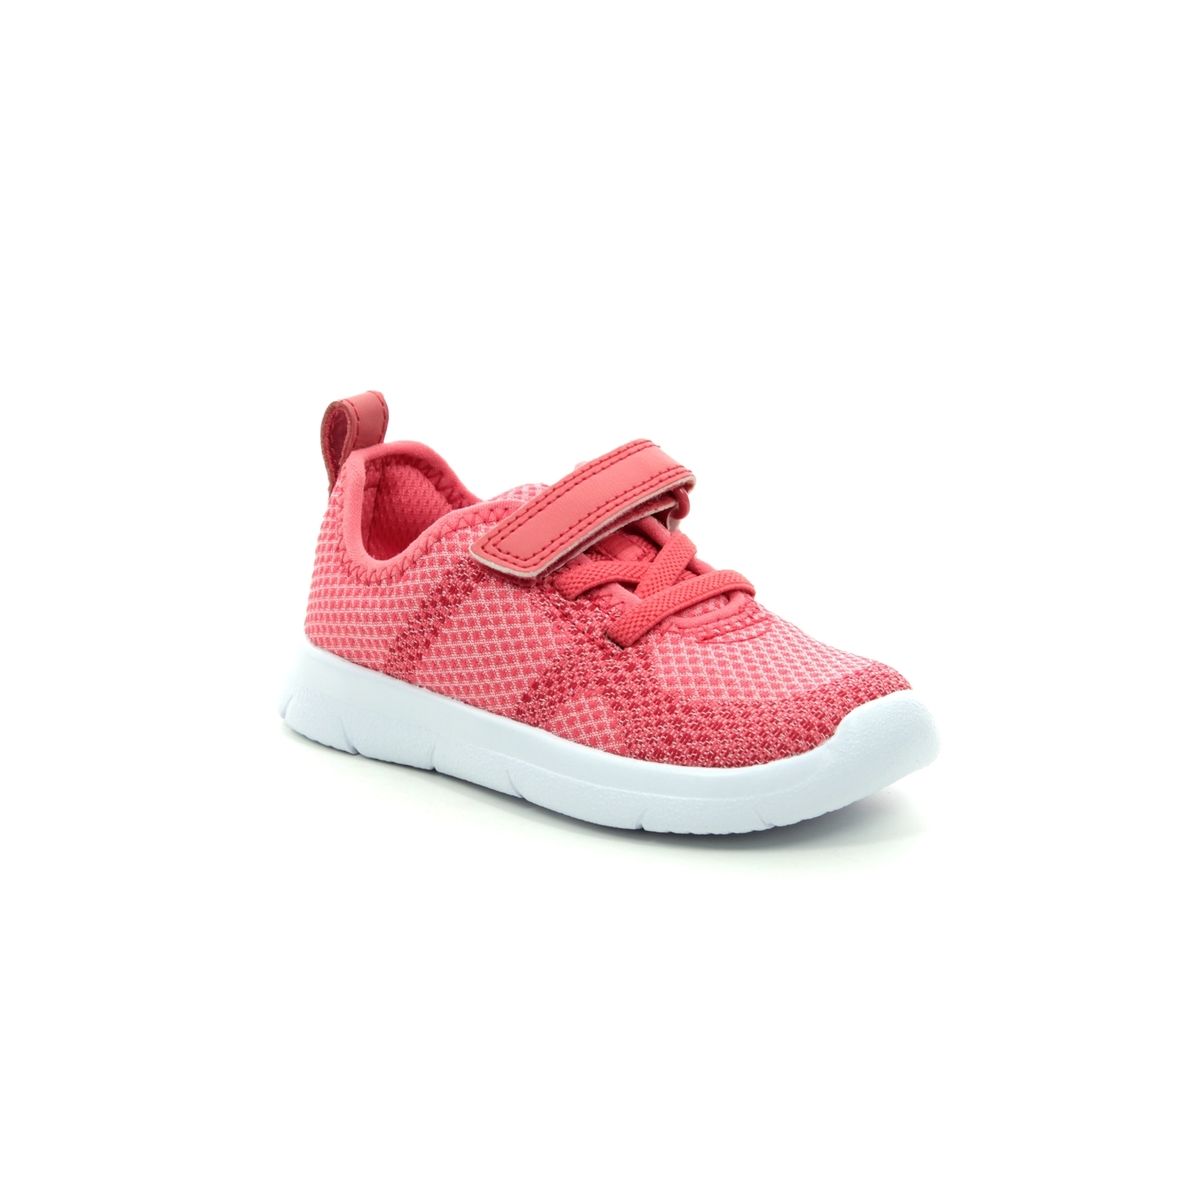 clarks infant trainers sale